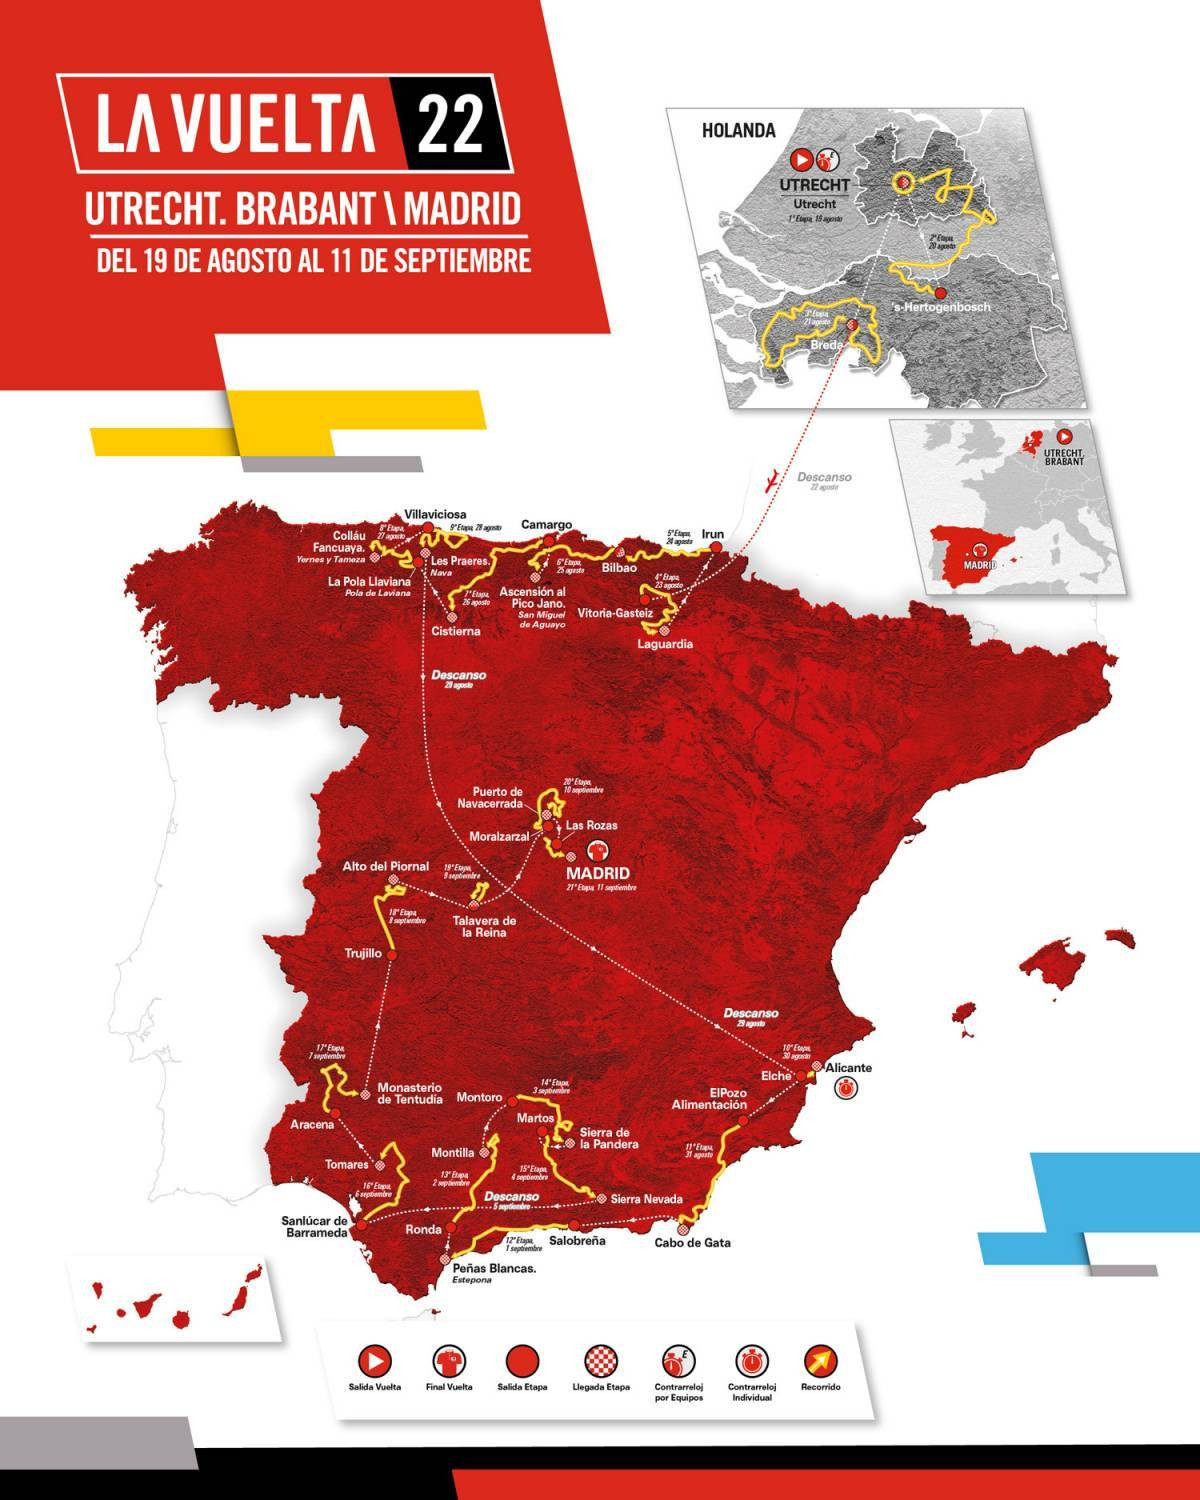 Full route for 2022 Vuelta a España revealed with Dutch start unveiled